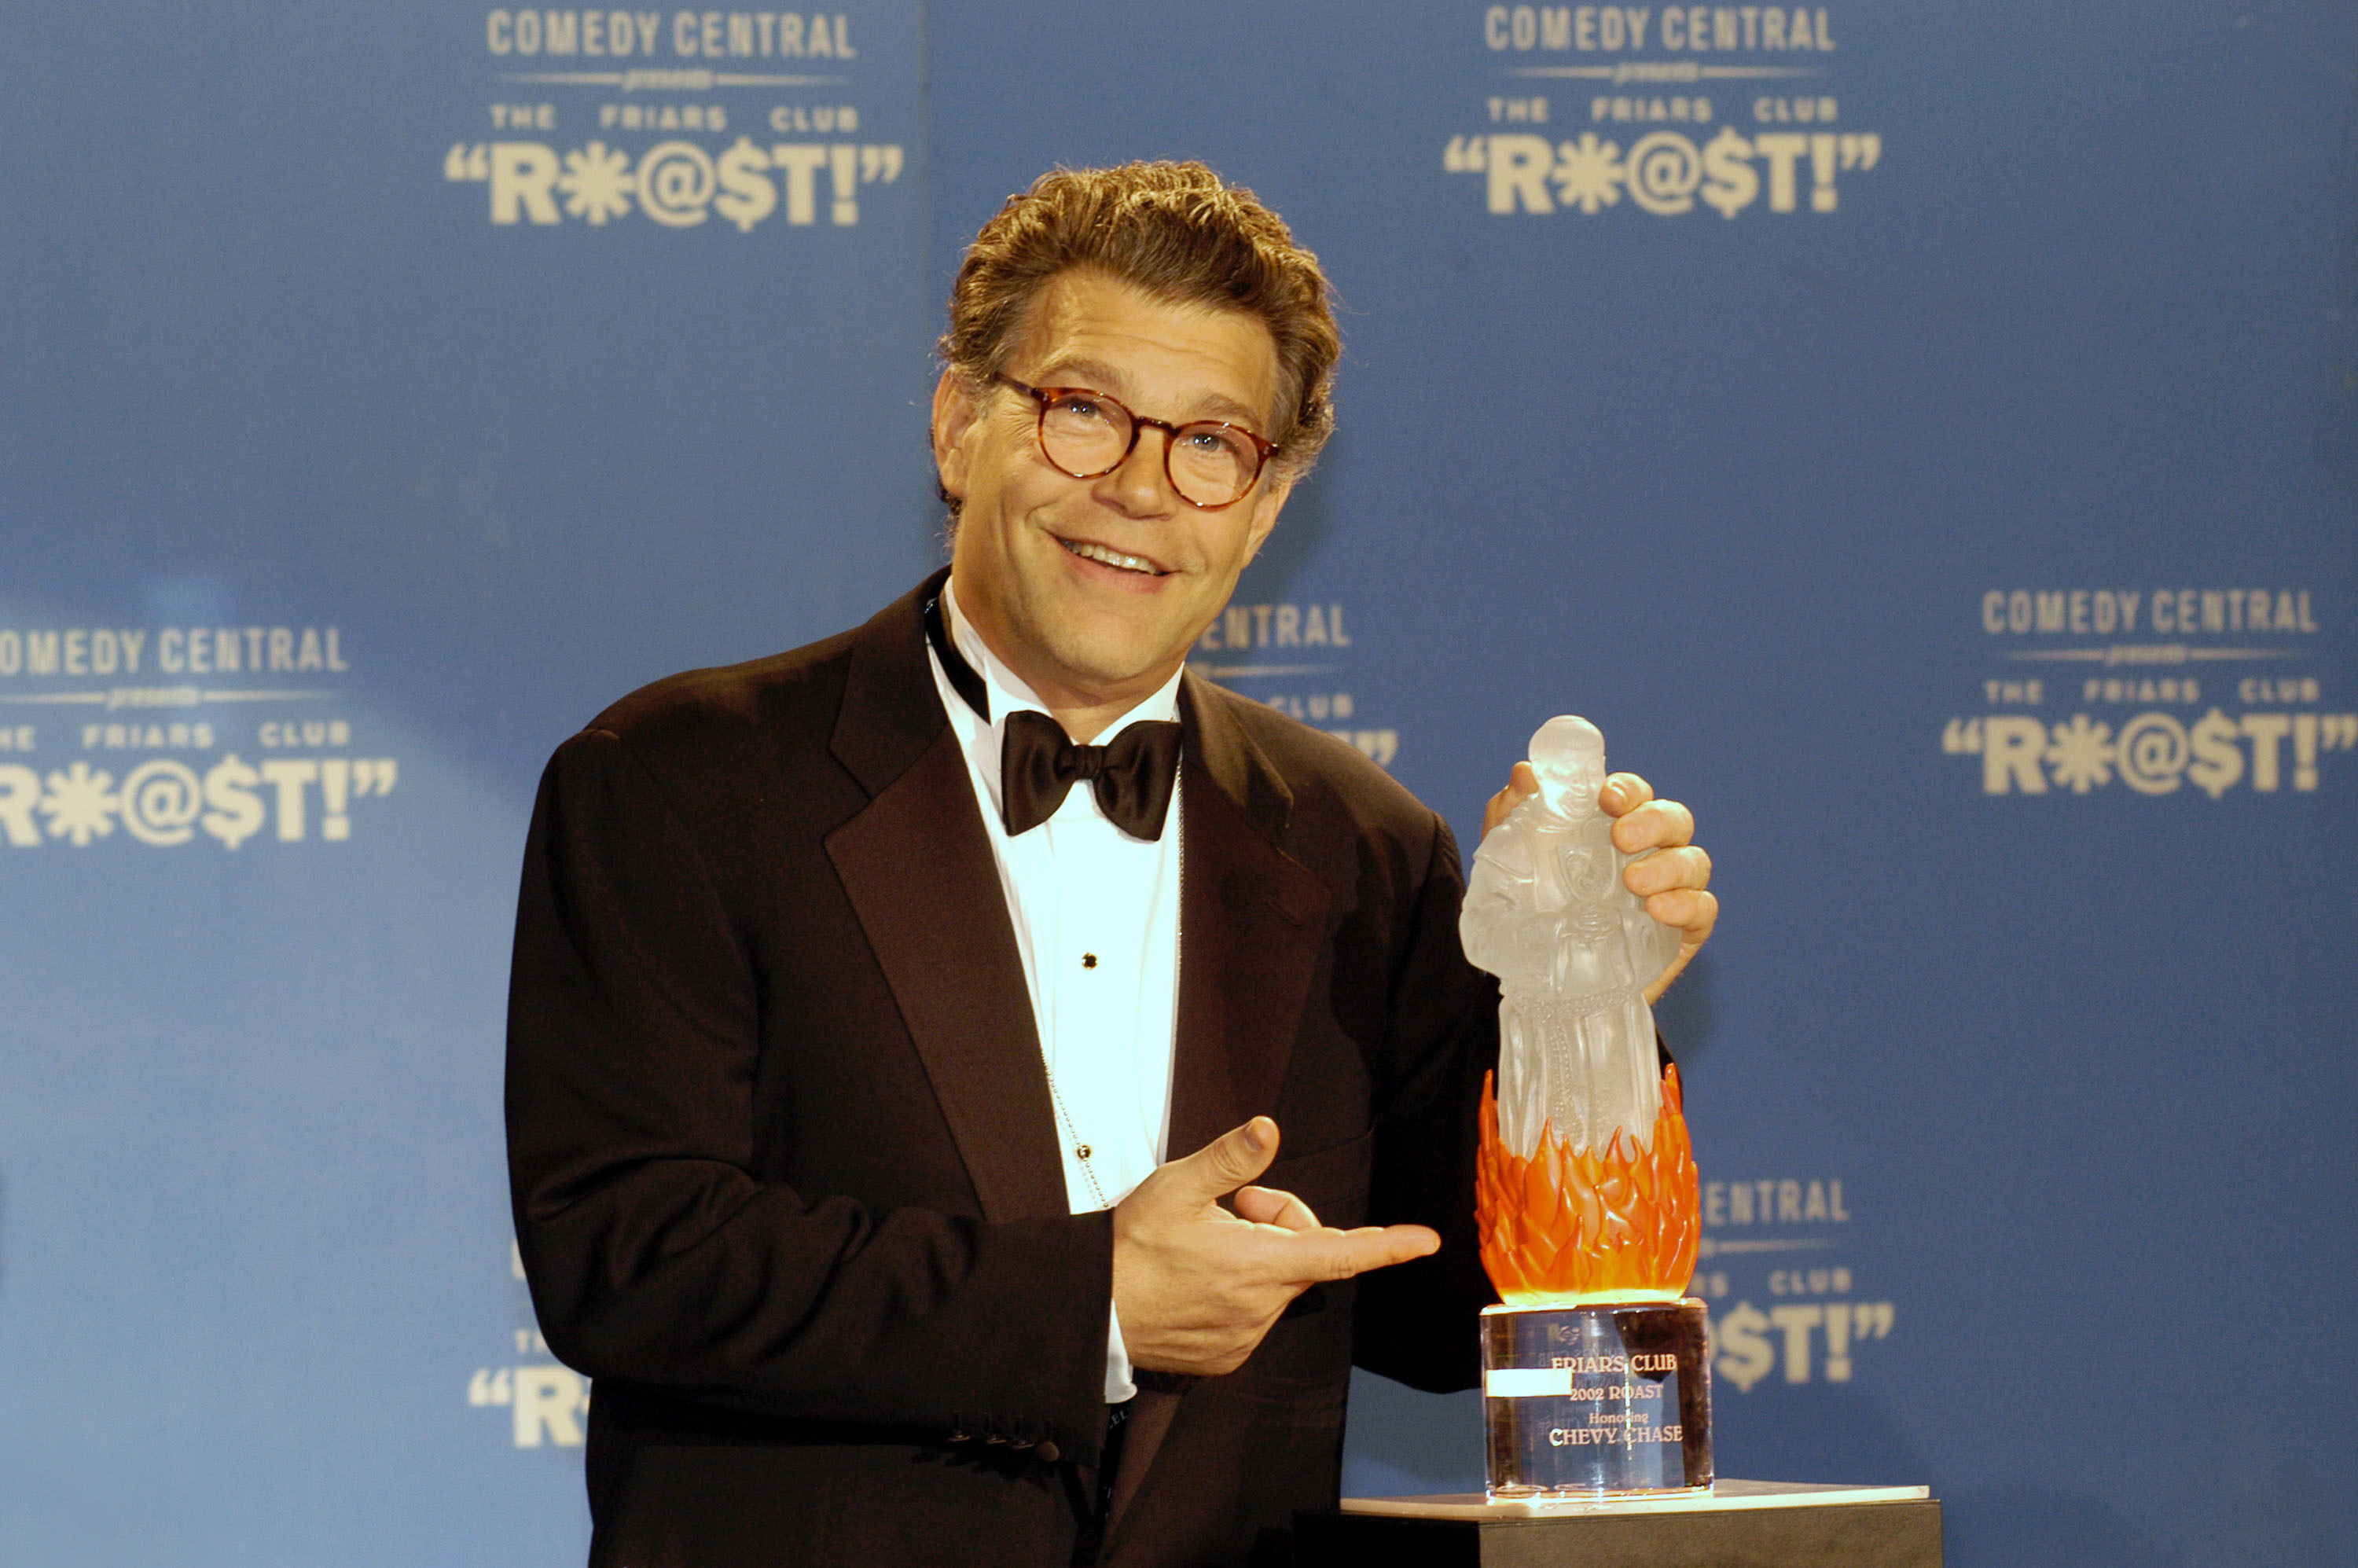 <p>Speaking of Al Franken, the former Senator was one of only three "SNL" alums to attend, which he explained because "Chevy's an arrogant prıck." He also made fun Chevy's addiction to "back pills," and how he once tried to buy an entire kilo of back pills. But the simplest and most cutting joke came when he said "No one laughed harder than Chevy when the town of Chevy Chase, Maryland tried to change its name to Not Funny, Maryland."</p><p>You may also like: <a href='https://www.yardbarker.com/entertainment/articles/23_tv_shows_with_characters_who_inexplicably_disappeared_040424/s1__39688445'>23 TV shows with characters who inexplicably disappeared</a></p>